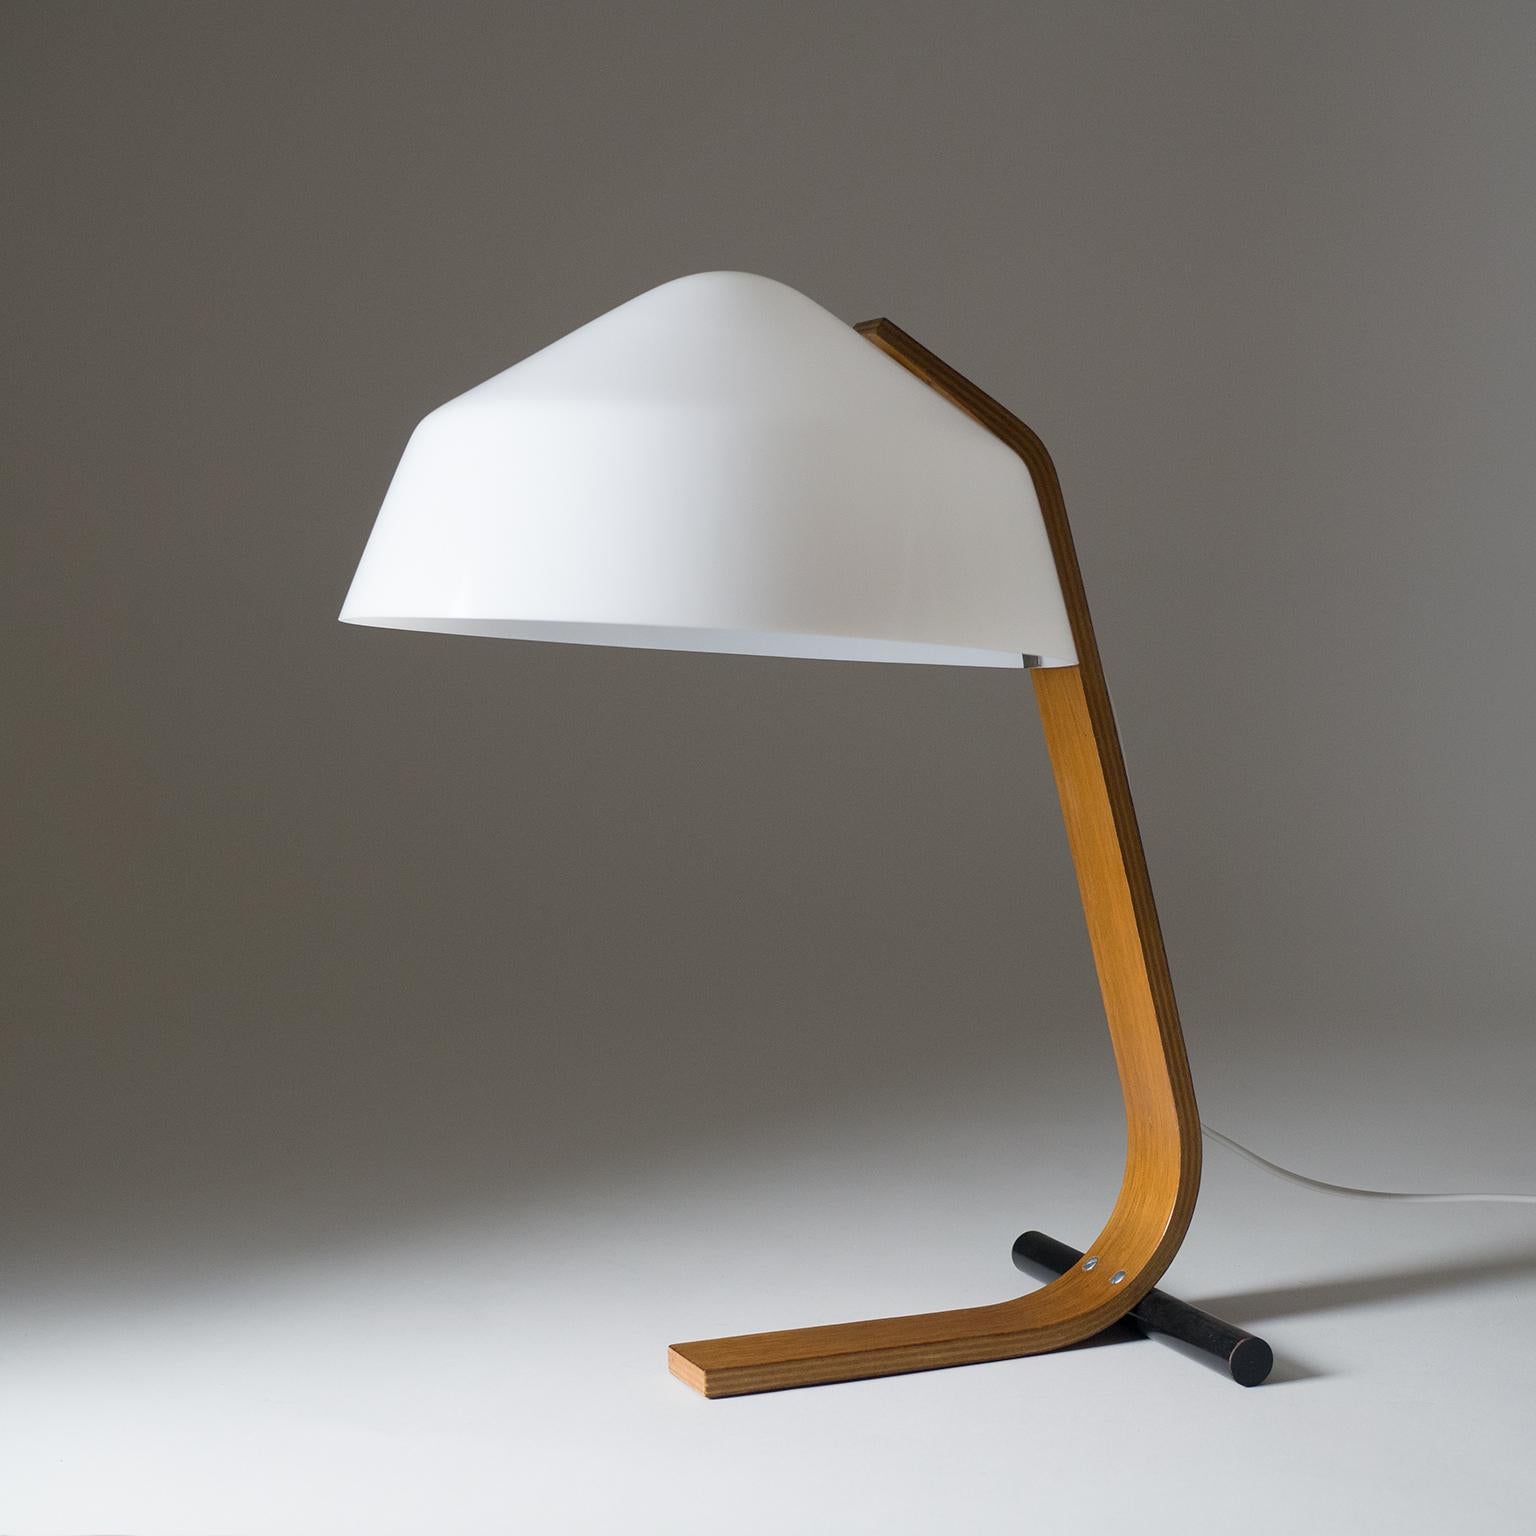 Beautiful bent plywood table or desk lamps with a large acrylic shade by Temde, 1960s. Very clean lines with a sleek silhouette. The 'T-base' is complimented by a black lacquered steel rod. One original E27 socket with new wiring and original